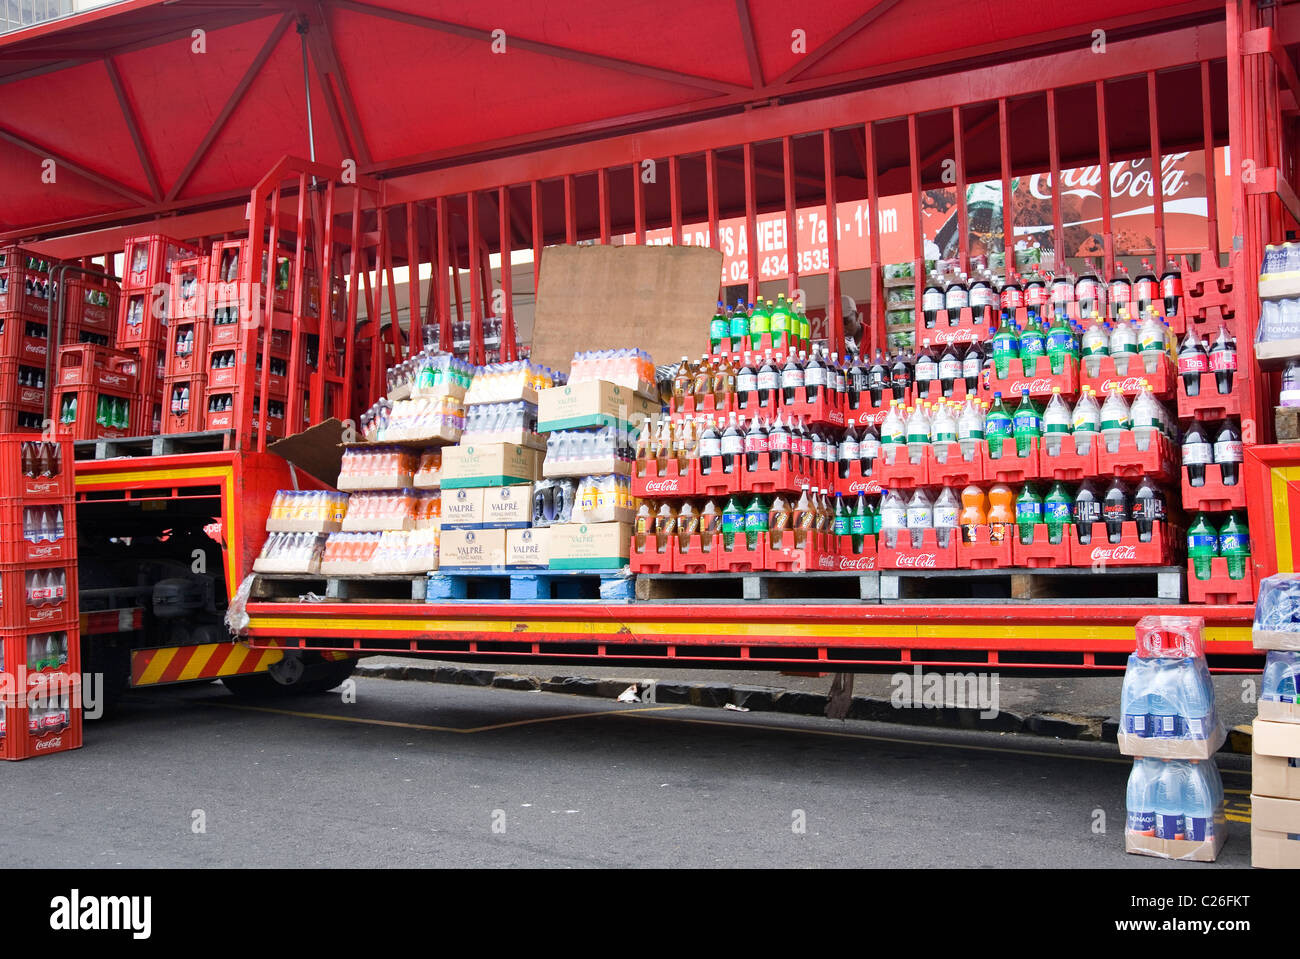 Large Coca Cola delivery truck Stock Photo